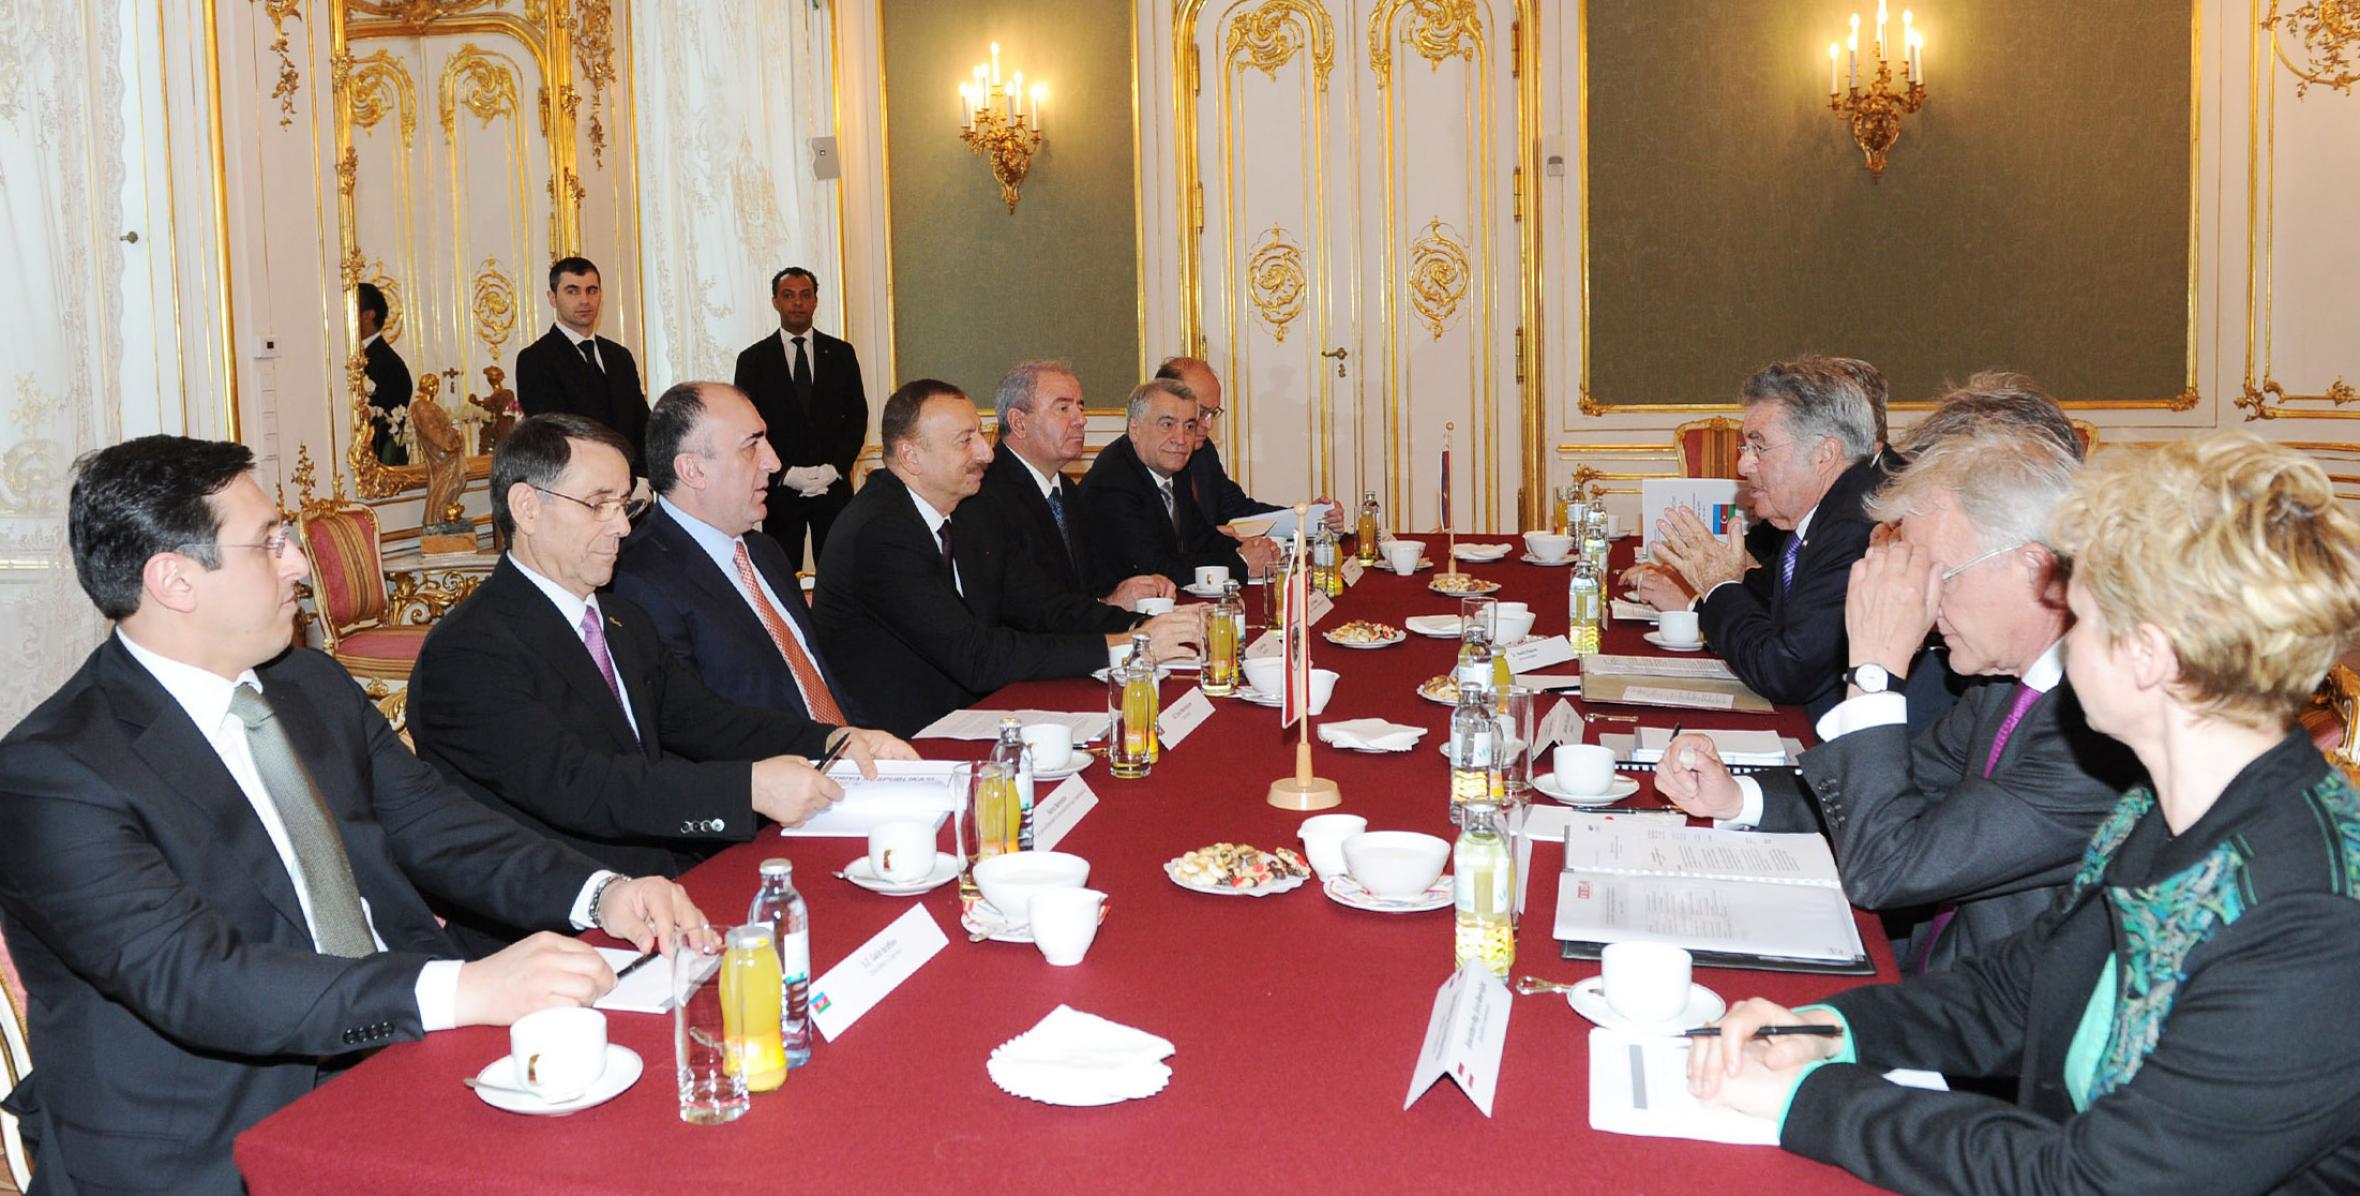 Presidents of Azerbaijan and Austria held a meeting in an expanded format